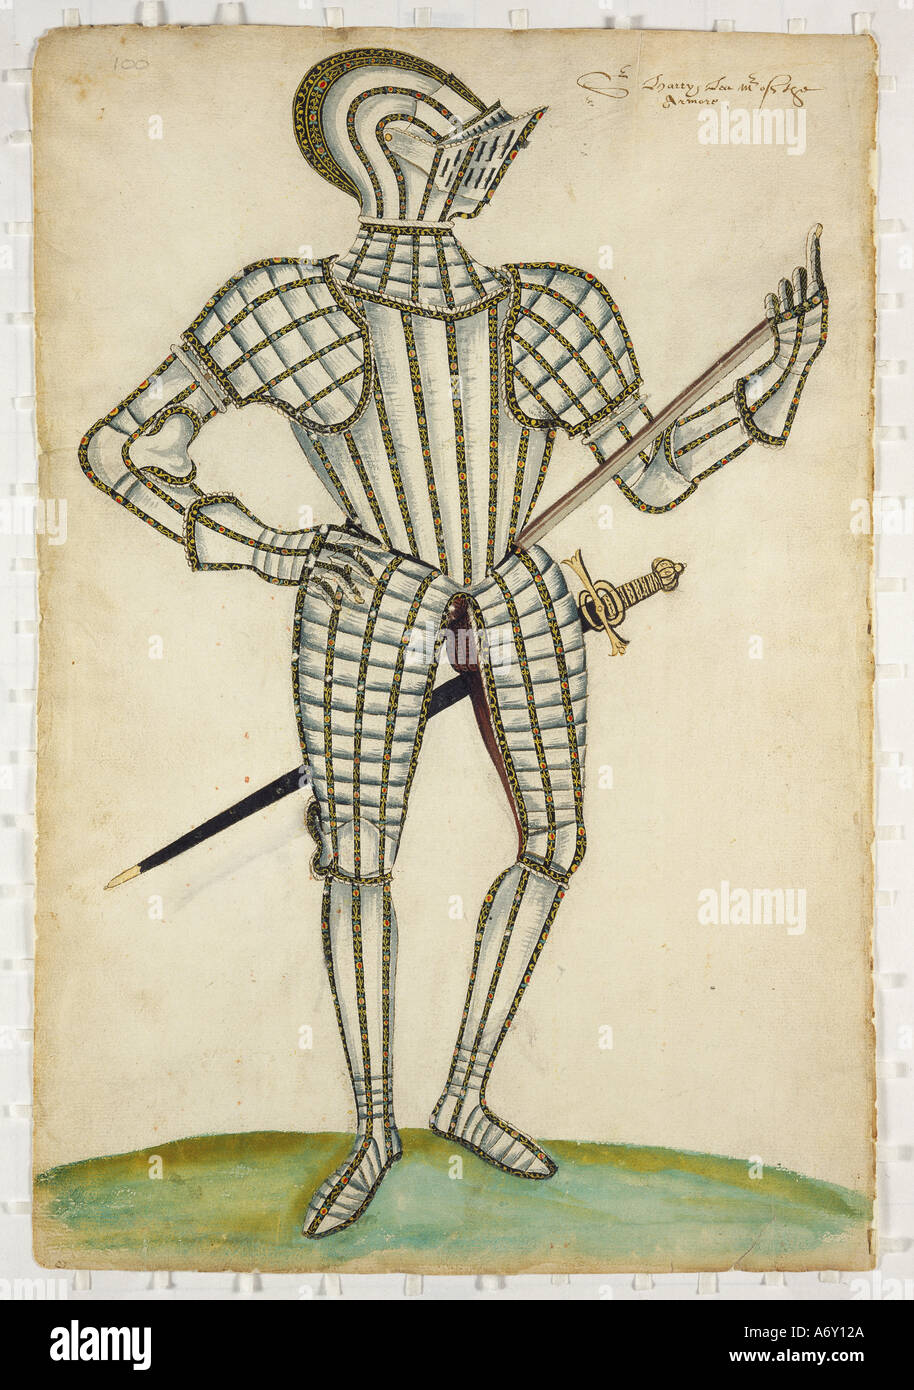 Suit of armour and details by Jacob Halder. England, late 16th - early 17th century. Stock Photo